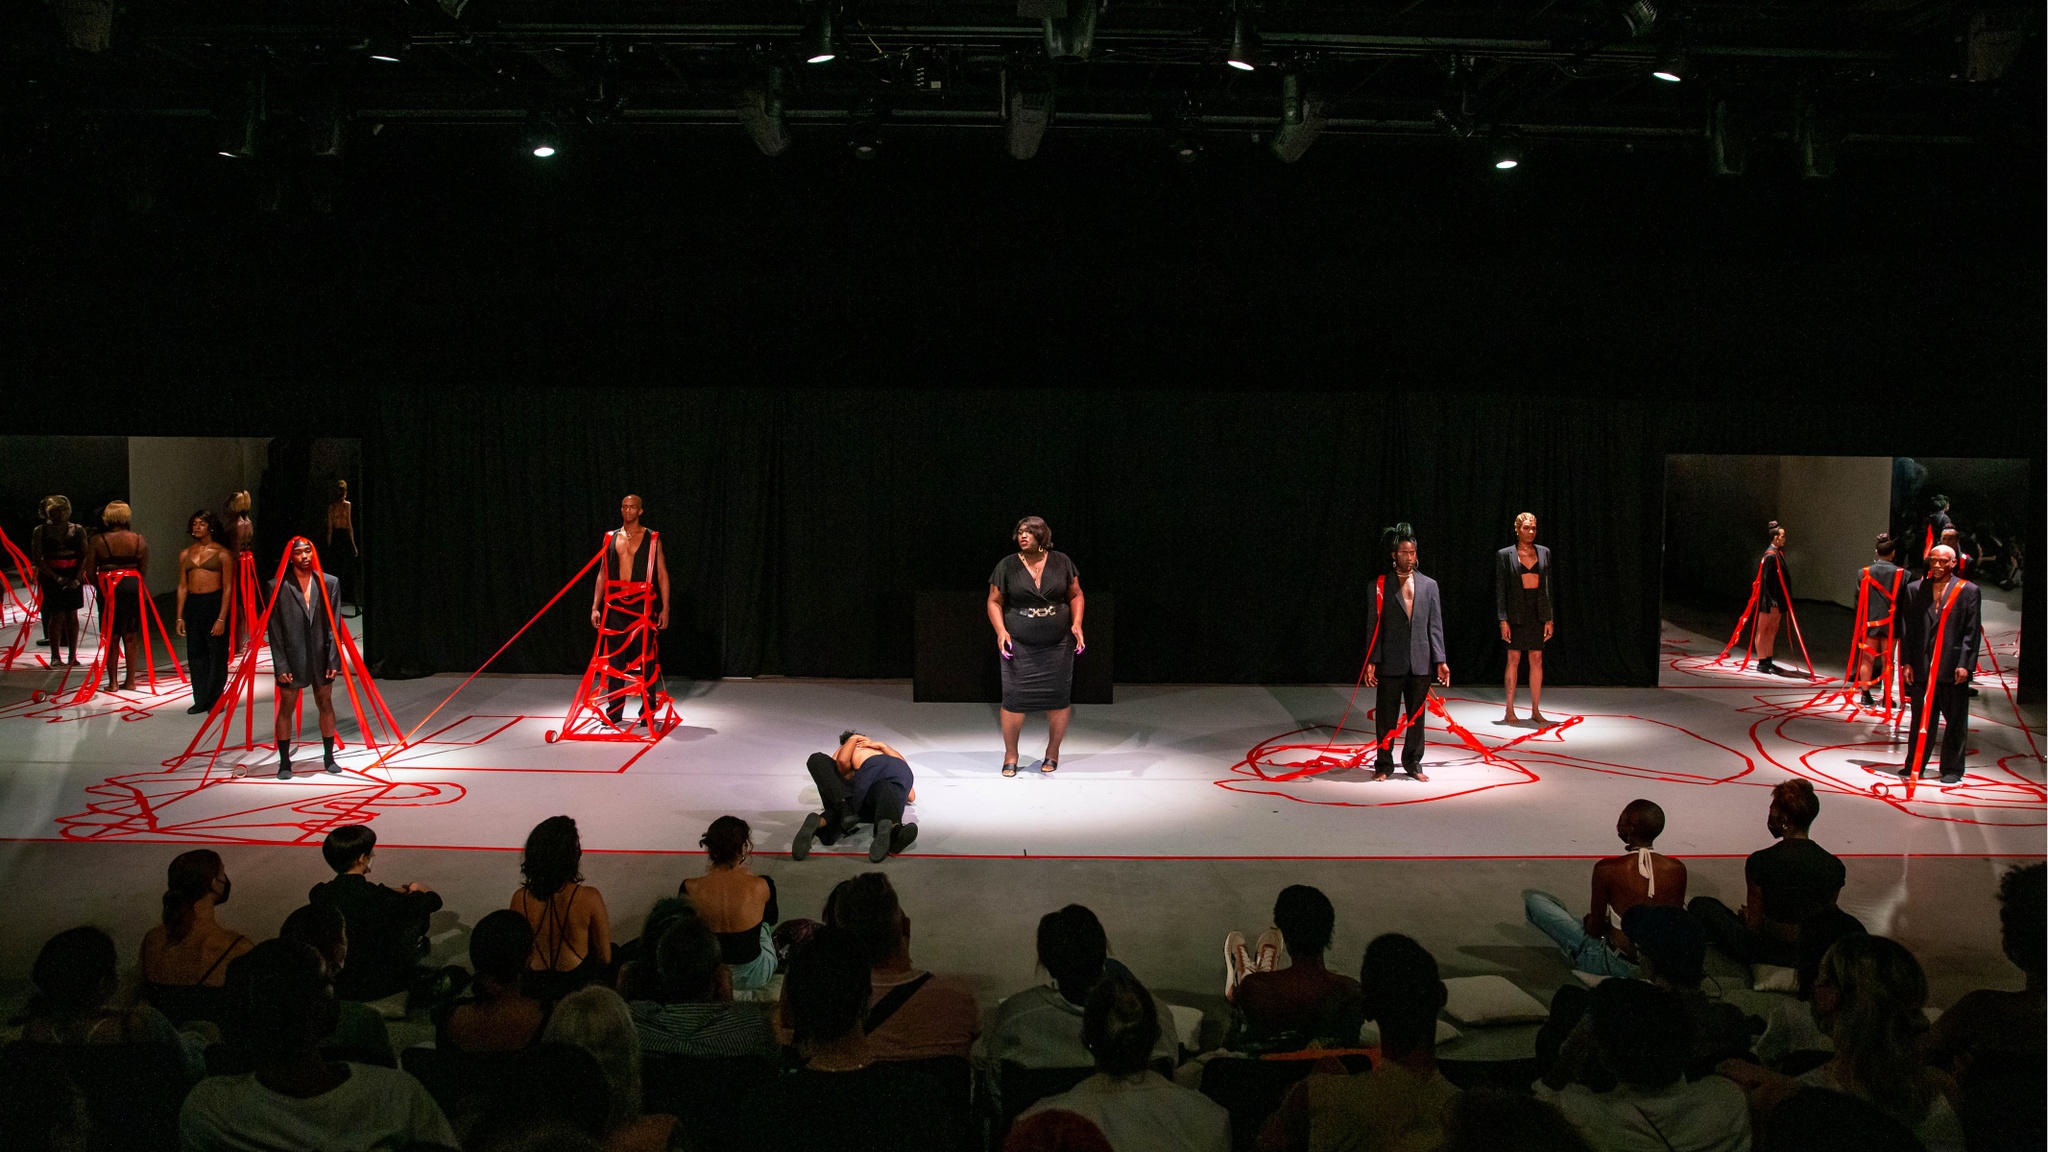 Nine Black trans performers stand on a stage wearing black suits and dresses in front of an audience. On the floor of the stage, two performers embrace as they roll together across the floor. Six of the standing performers have red tape reaching up from the ground to hold them in place.